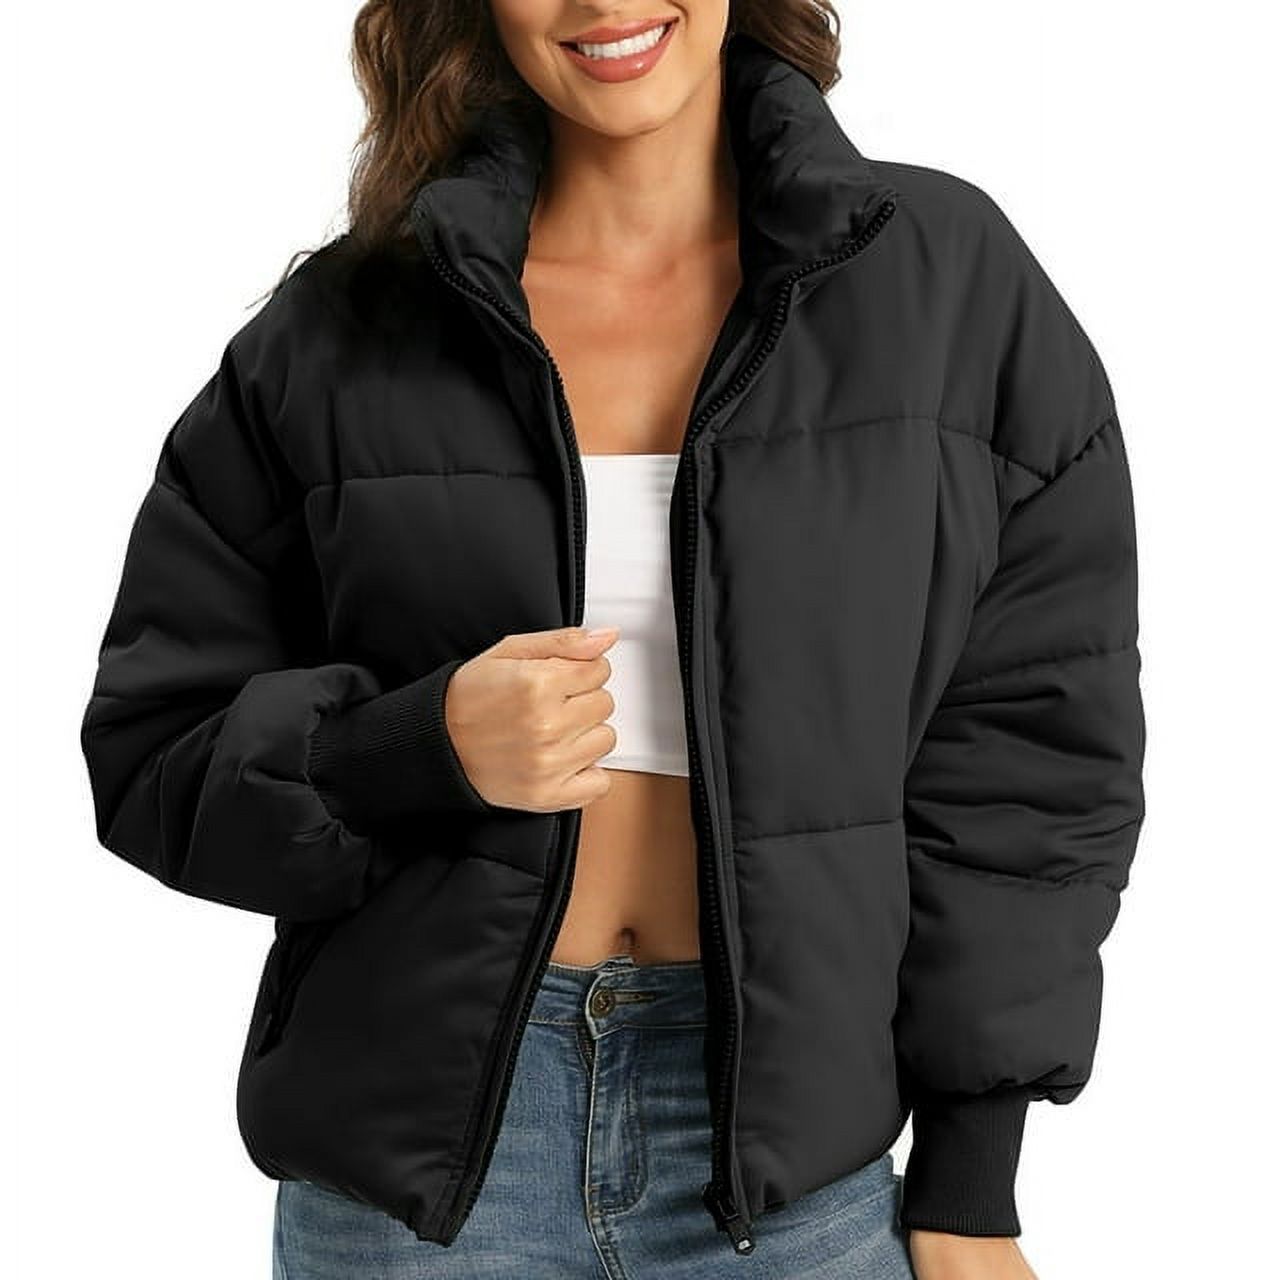 Movsou Women’s Cropped Puffer Jacket with Stand Collar - image 2 of 6